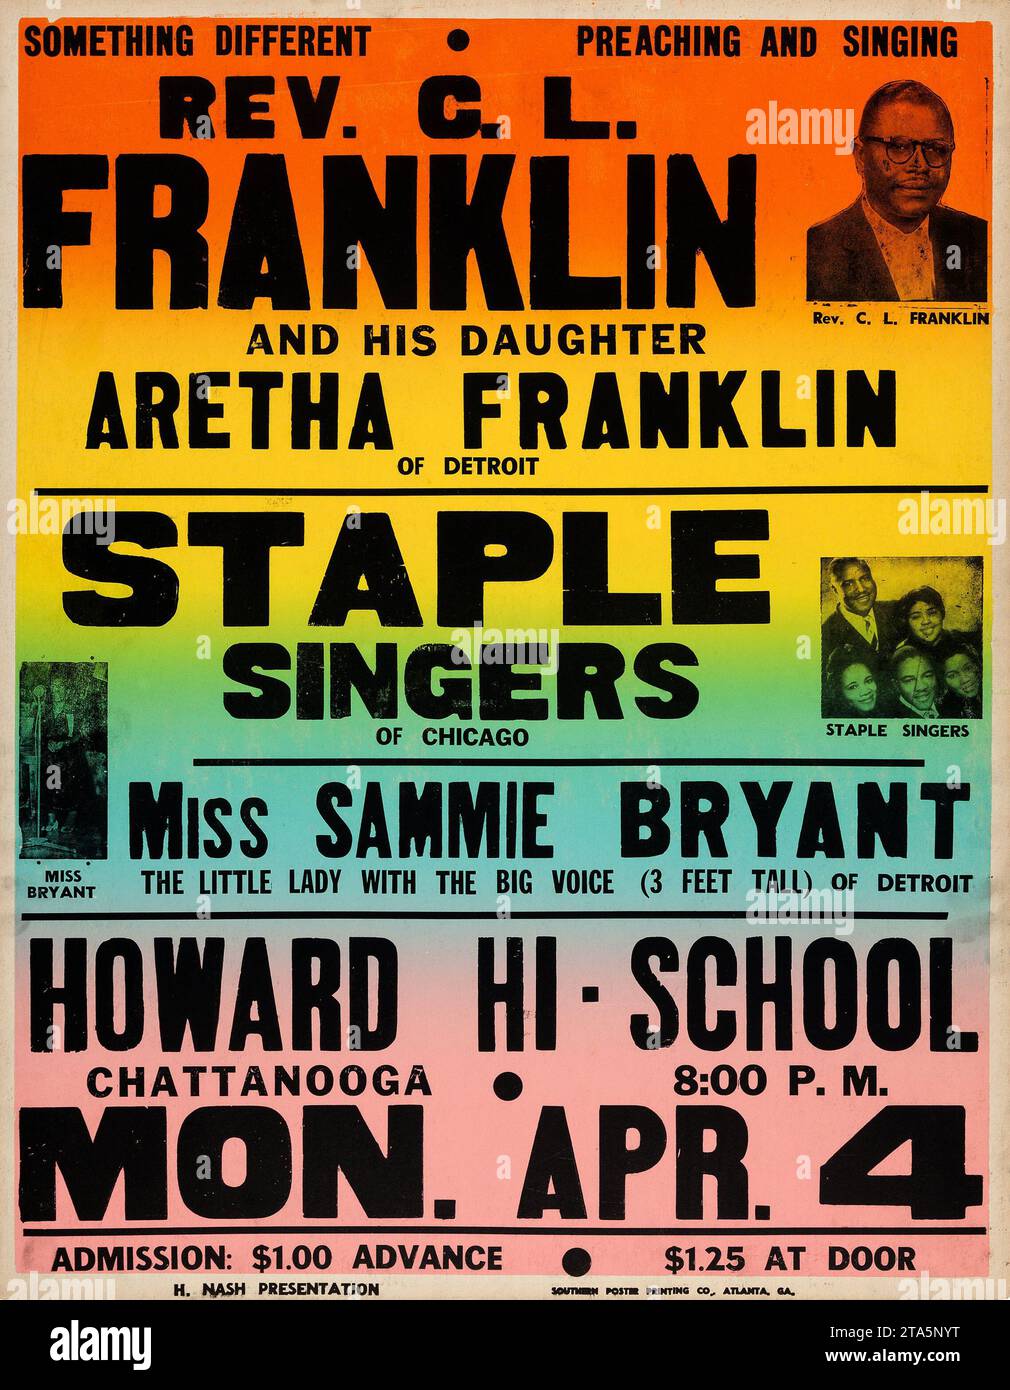 Rev. C.L. Franklin and his daughter Aretha Franklin, Staple Singers, Miss Sammie Bryant - Howard Hi School Concert Poster (1960) Stock Photo